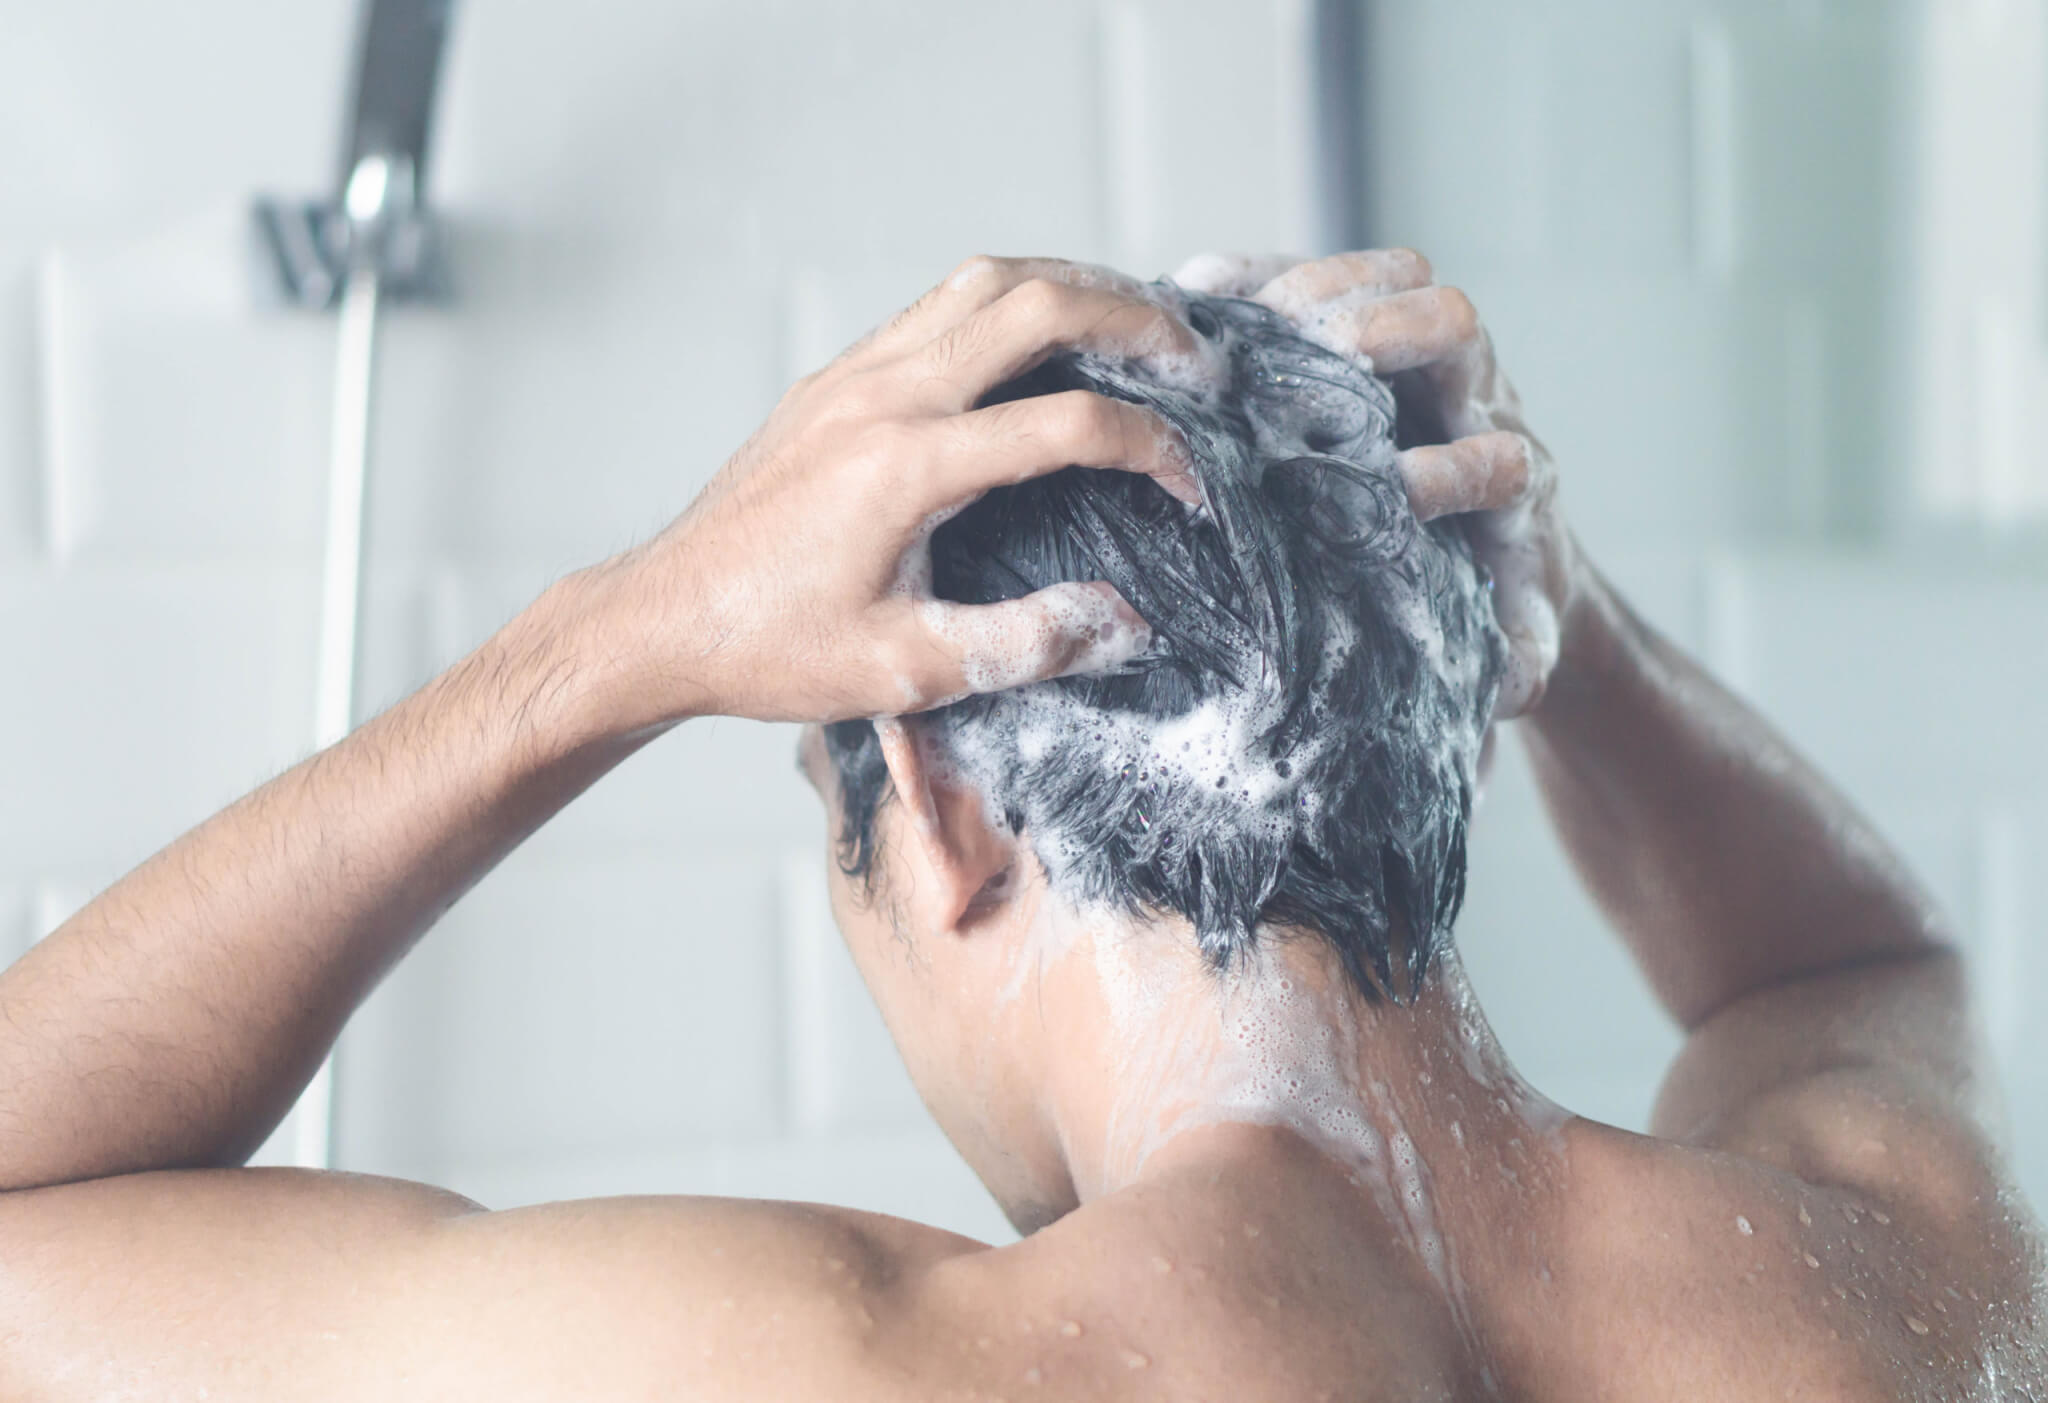 Best Of The Best Shampoo For Thinning Hair: Top 5 Washes Most Recommended  For Thicker Locks - Study Finds